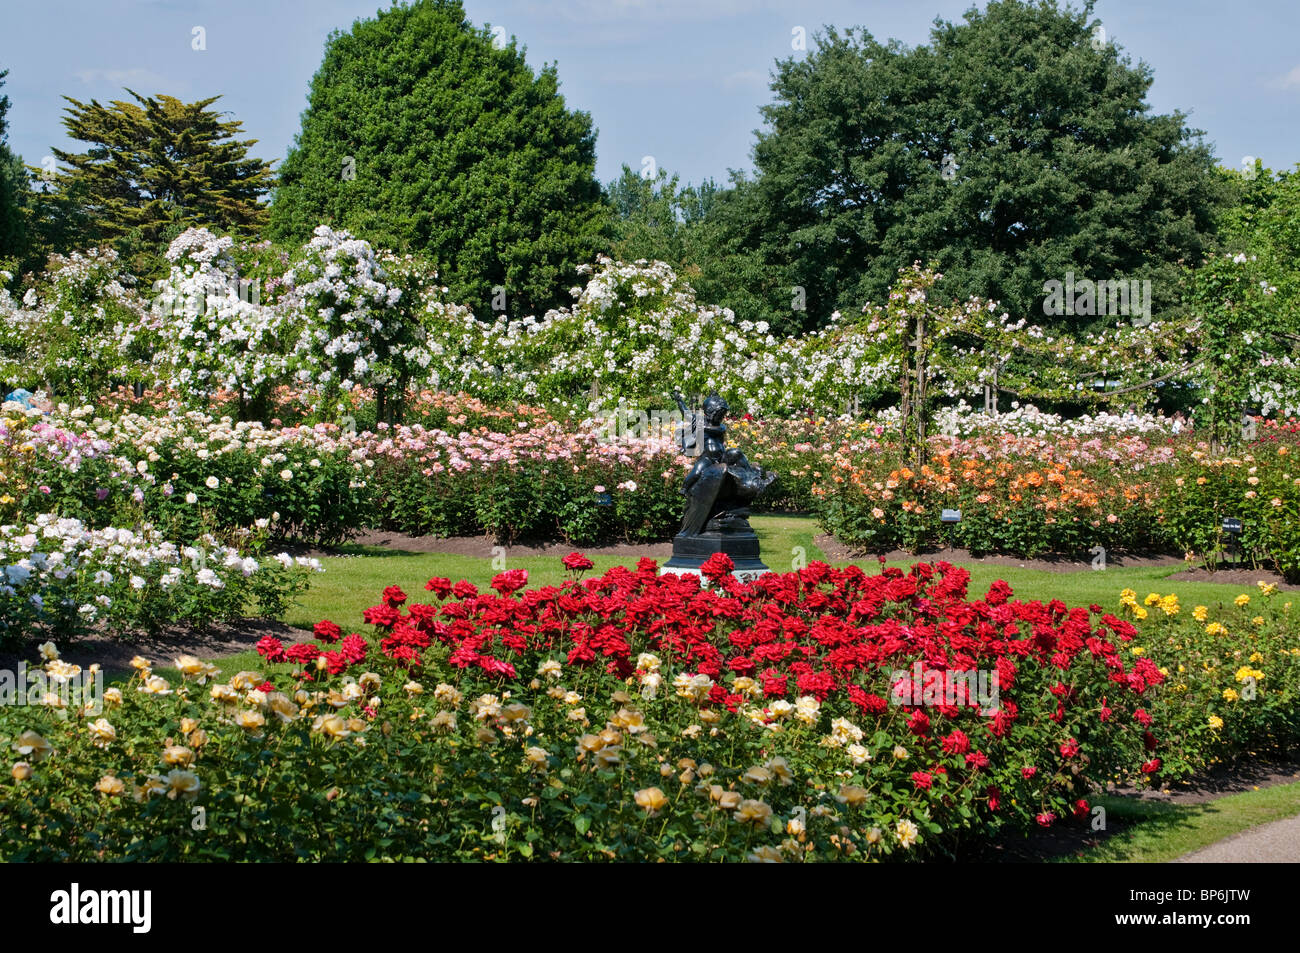 London. Regents Park, Queen Mary's Gardens, Roses. Stock Photo